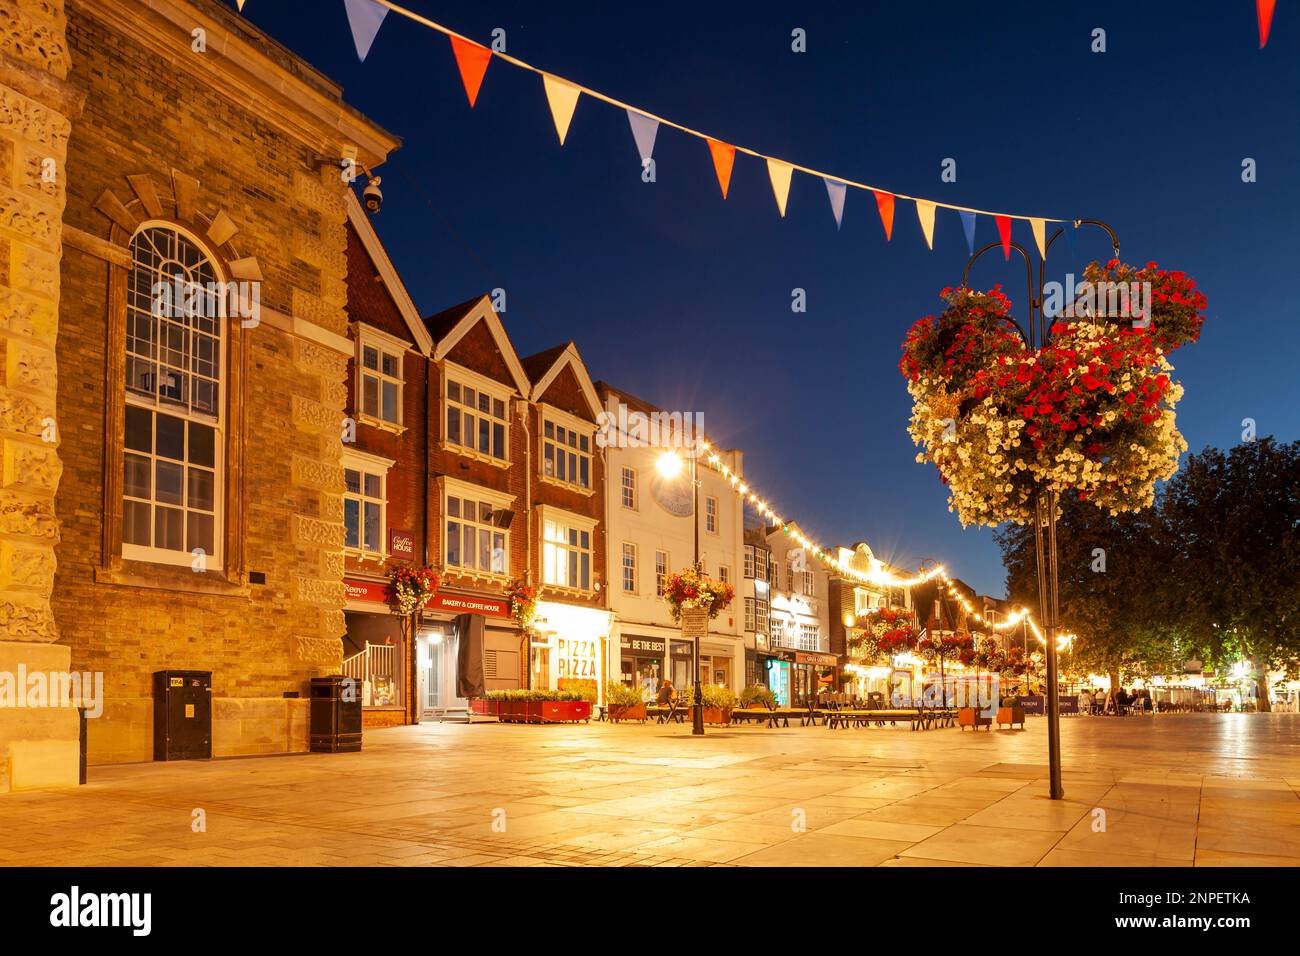 Summer evening at the Market Place in Salisbury. Stock Photo